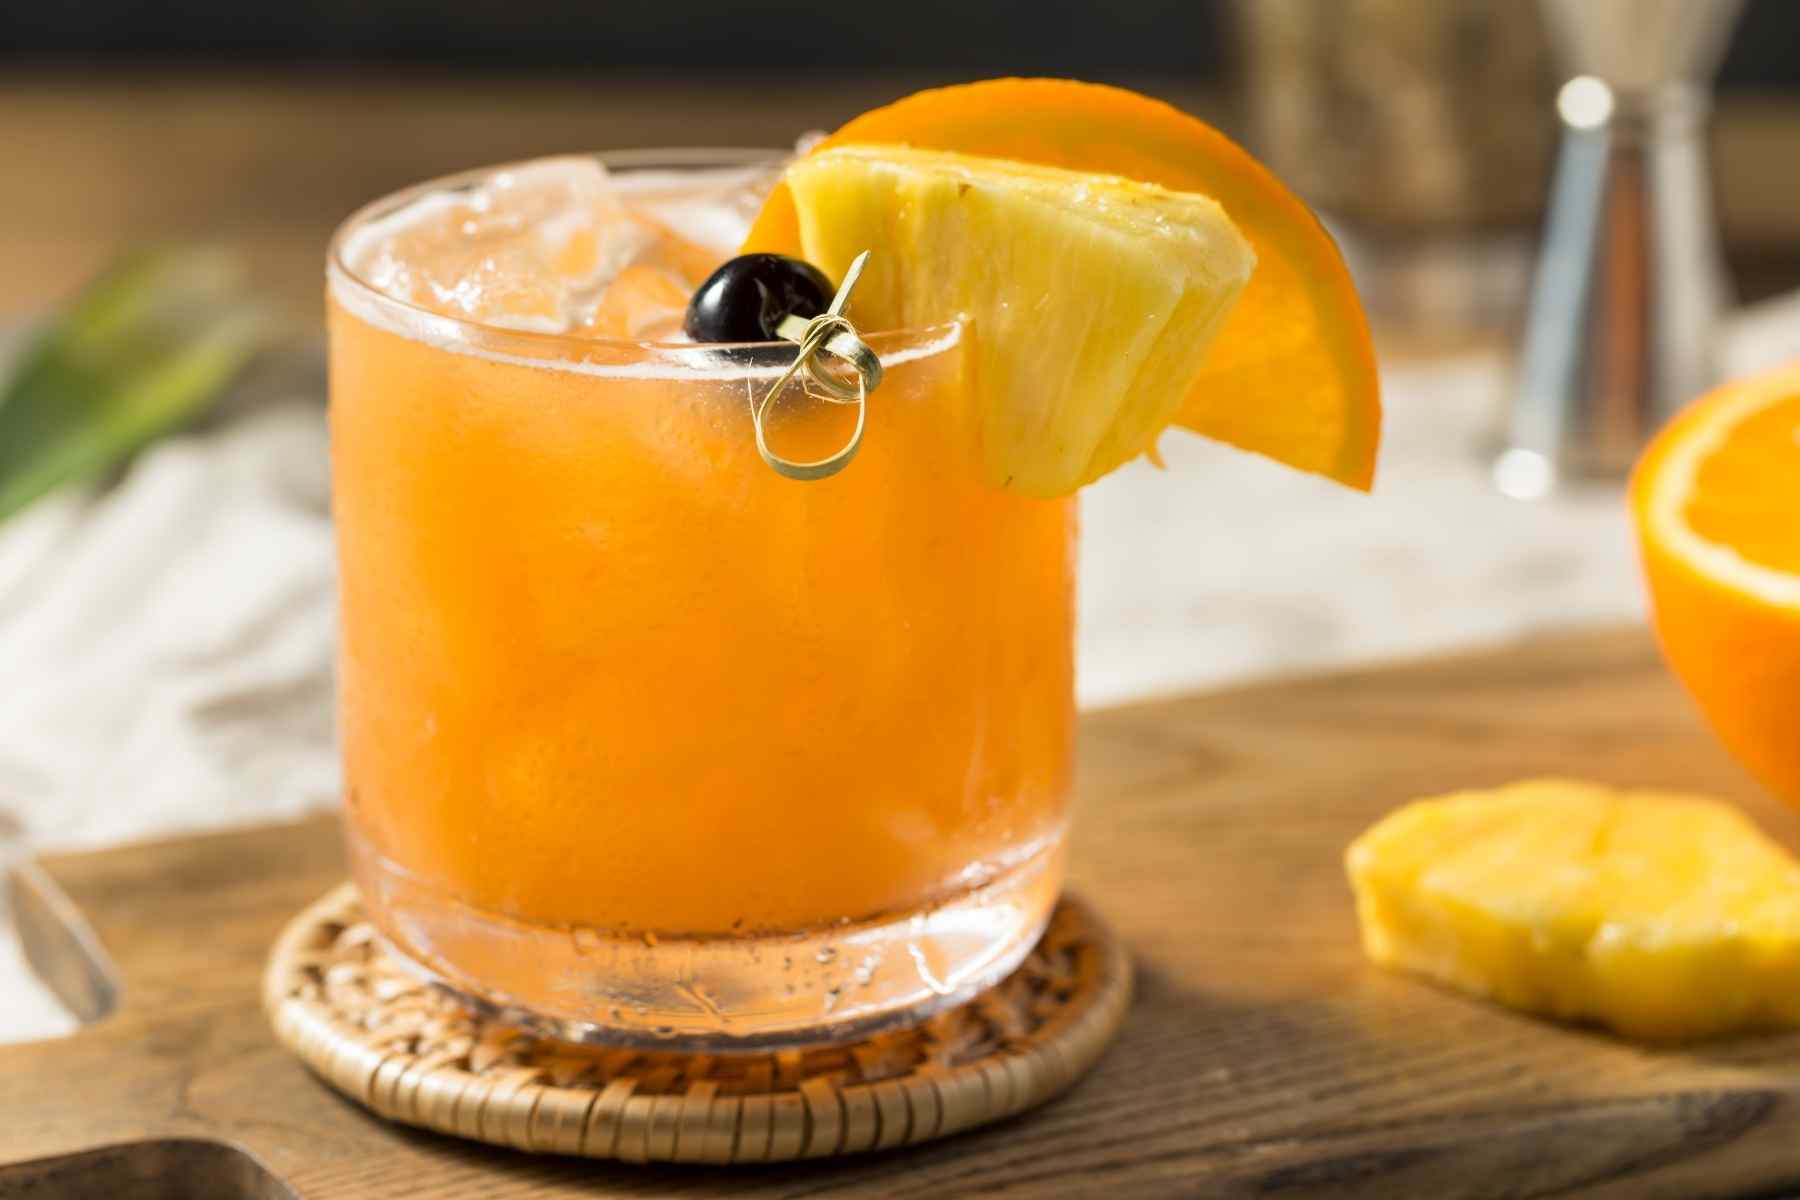 Run To Your “Happy Place” With Tribe’s CBD Rum Runner Cocktail